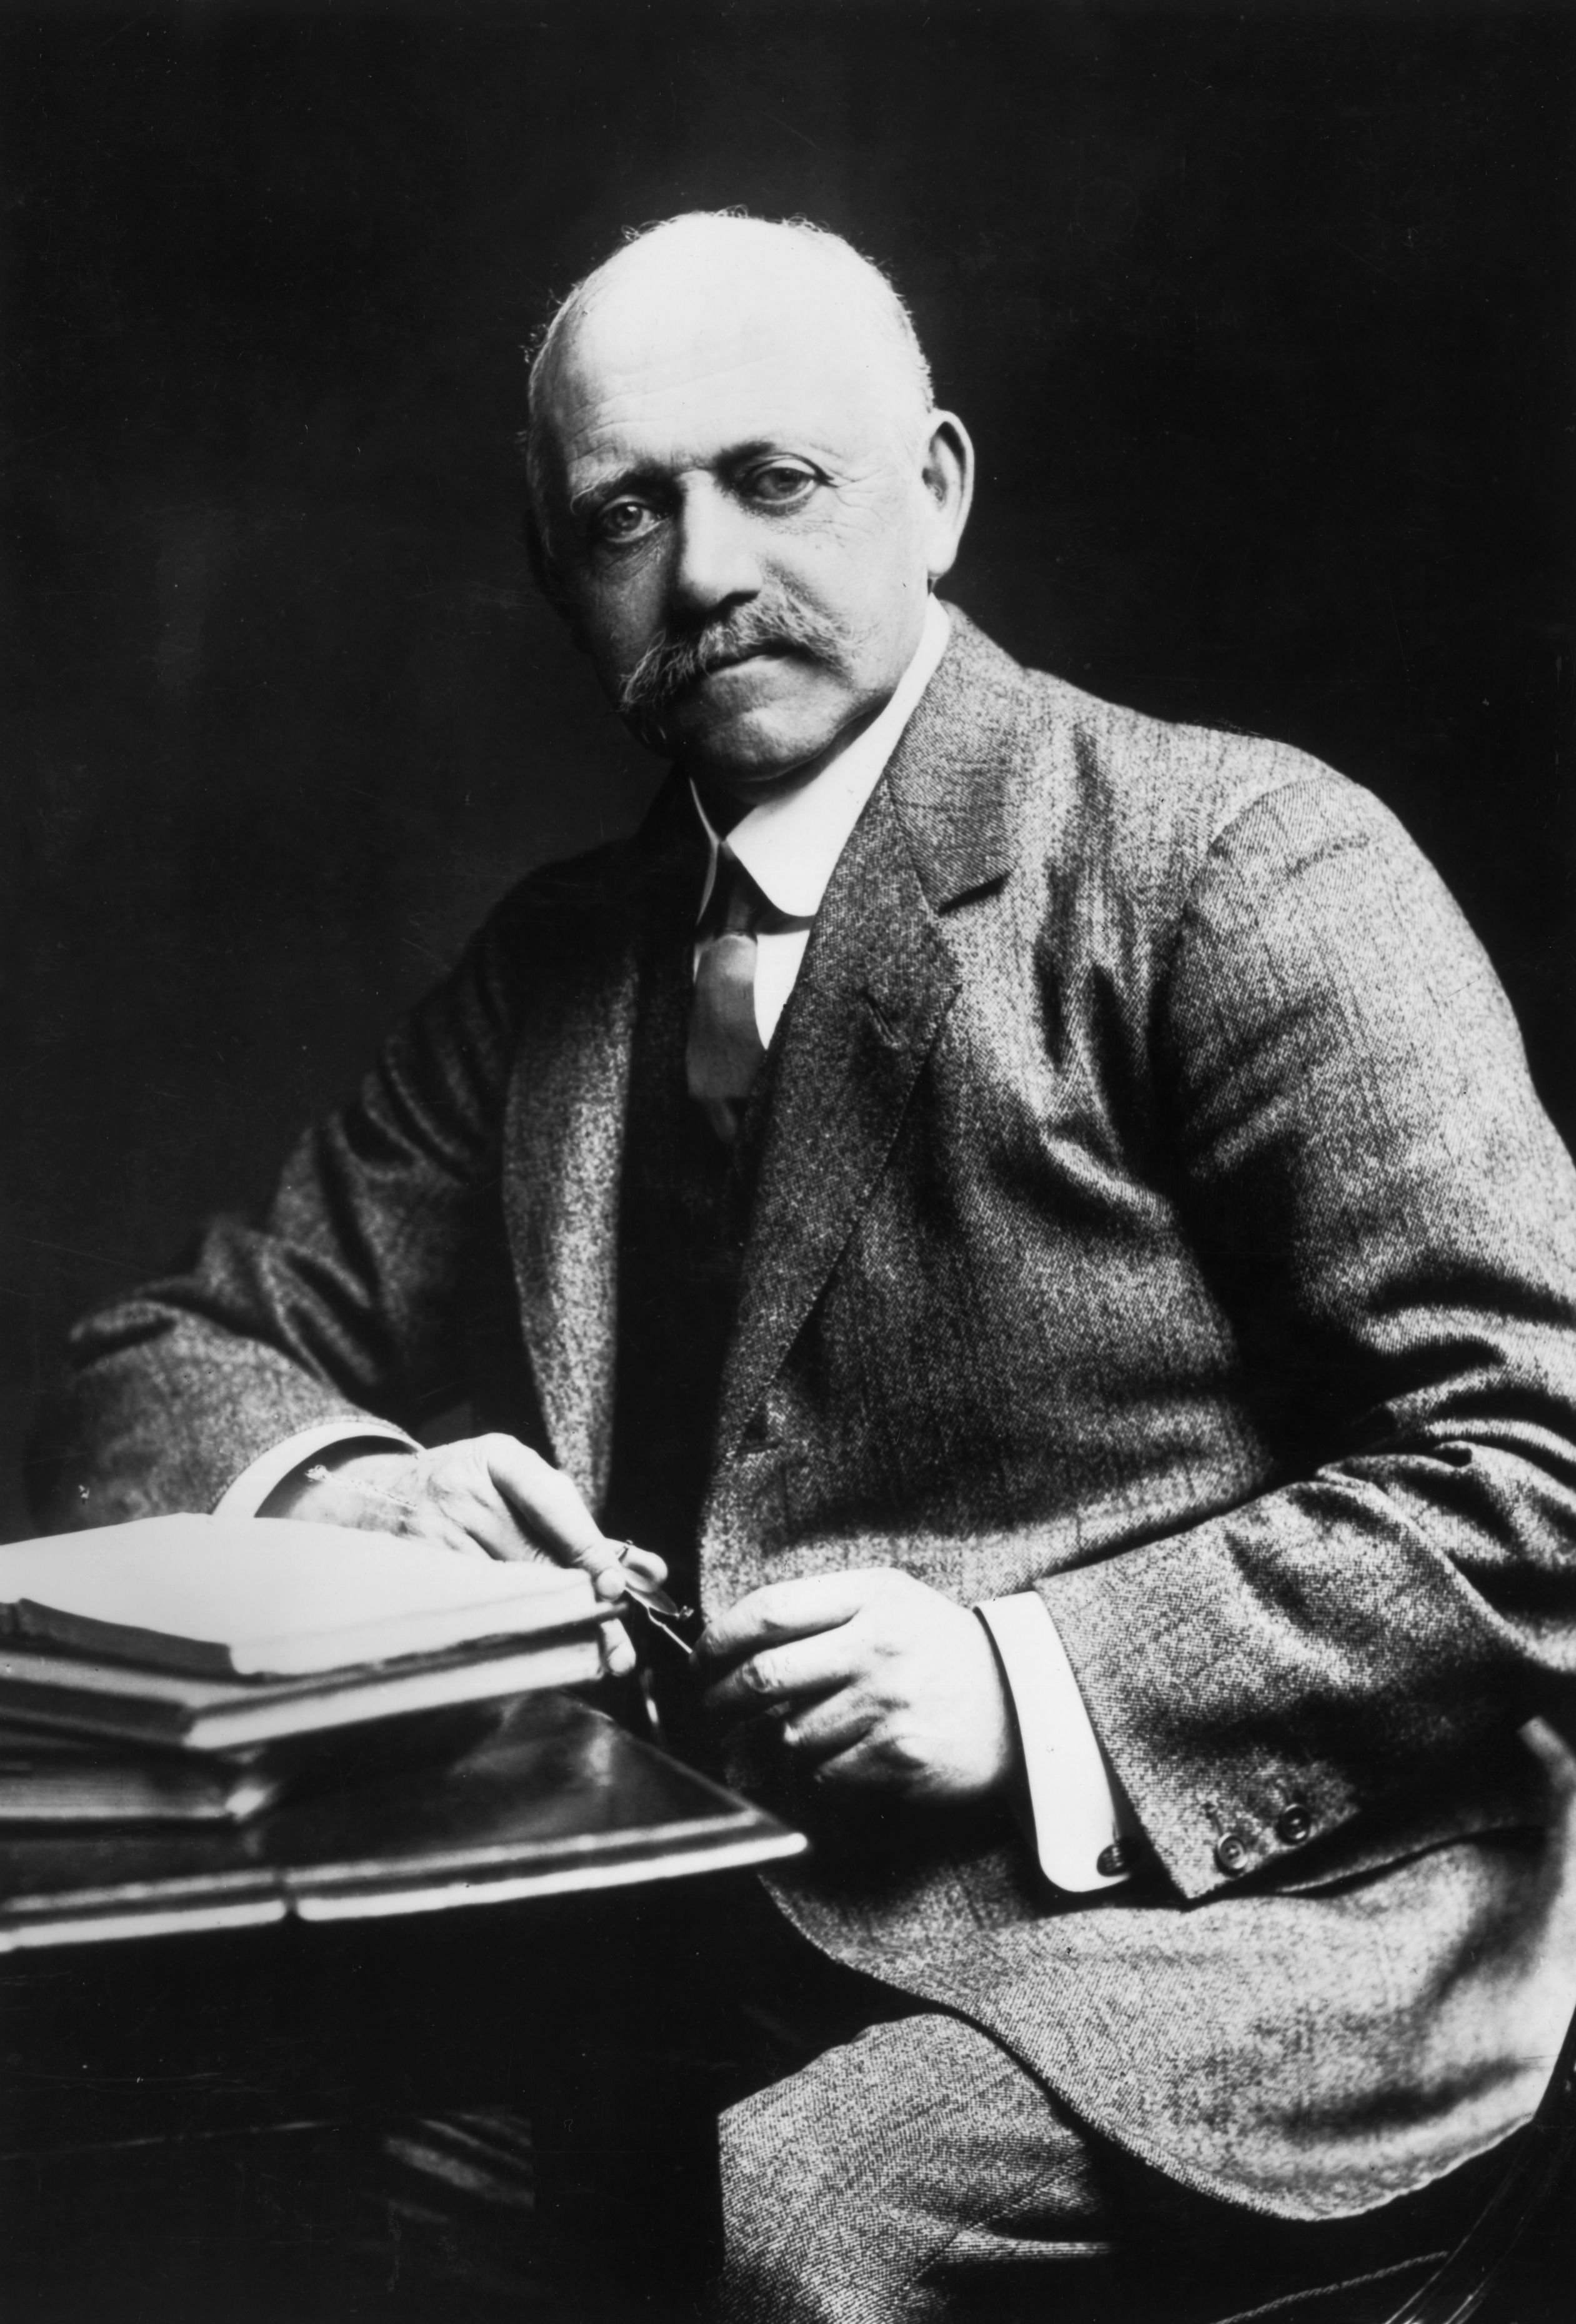 British builder William Willett (1850 - 1915) whose pamphlet 'Waste of Daylight' (1907) first laid out a serious proposition for the daylight saving scheme. (Hulton Archive—Getty Images)